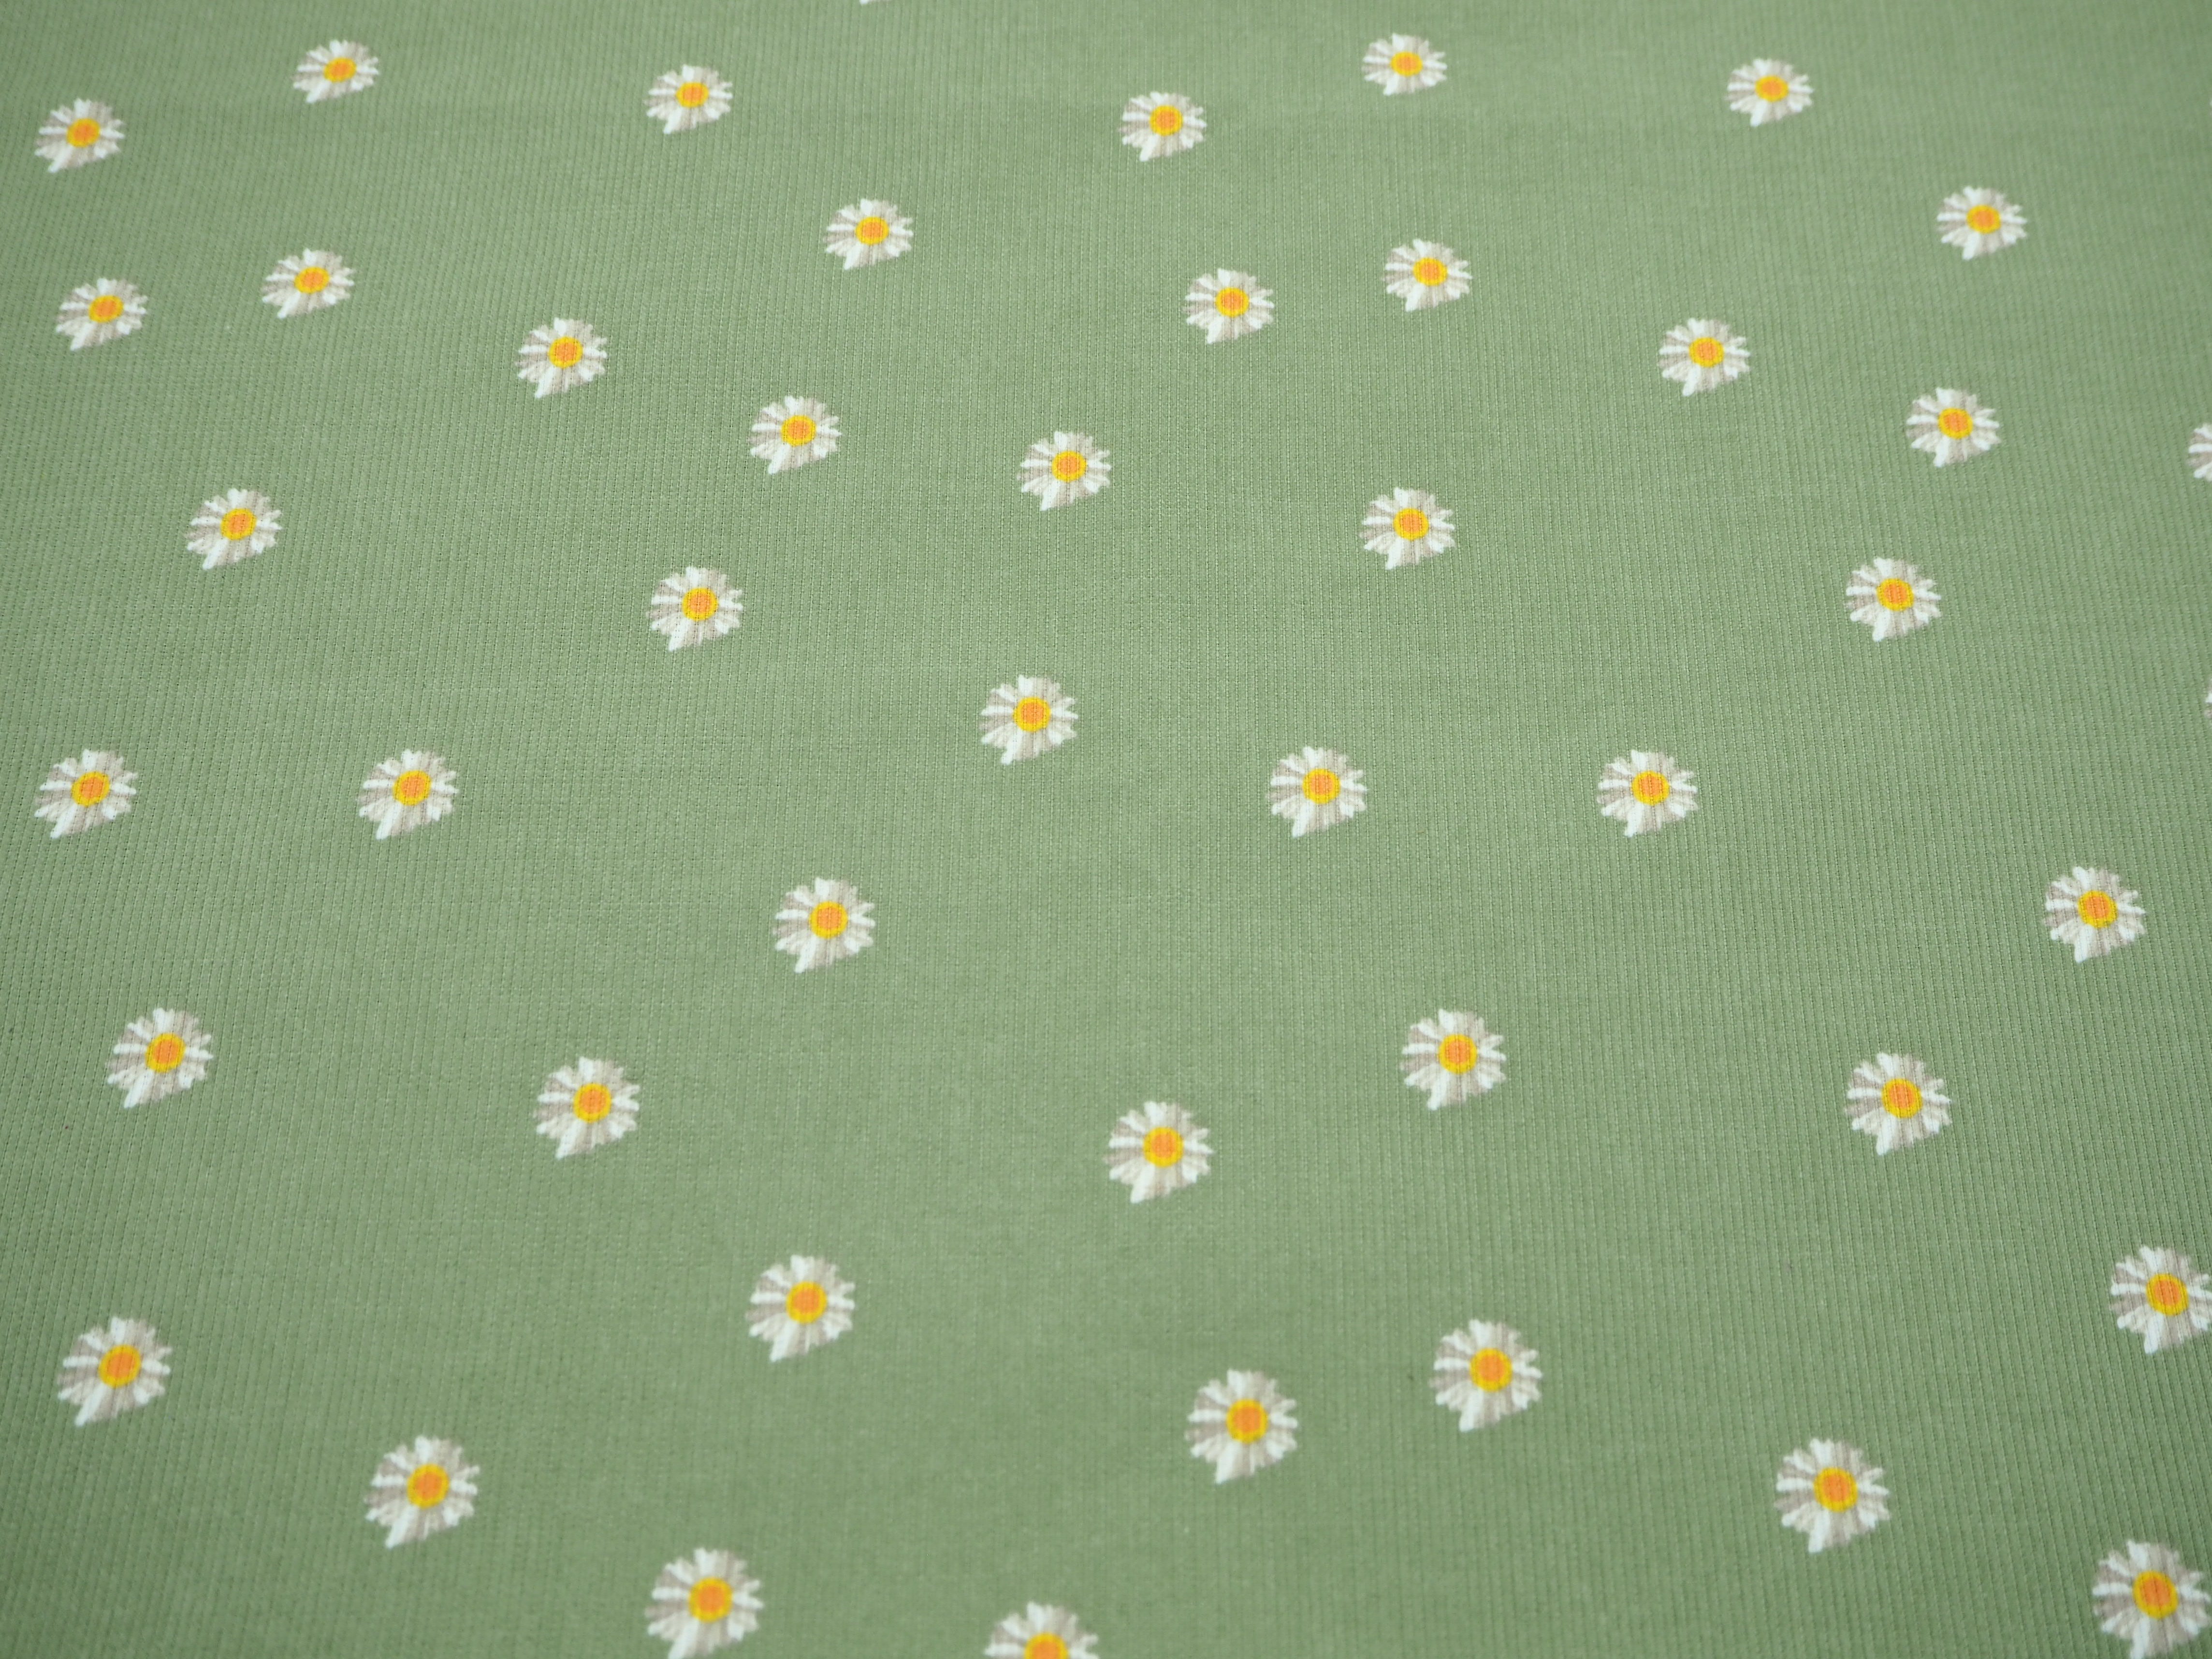 Cute yellow & white daisy's in a field of sage green on soft corduroy 100% cotton fabric